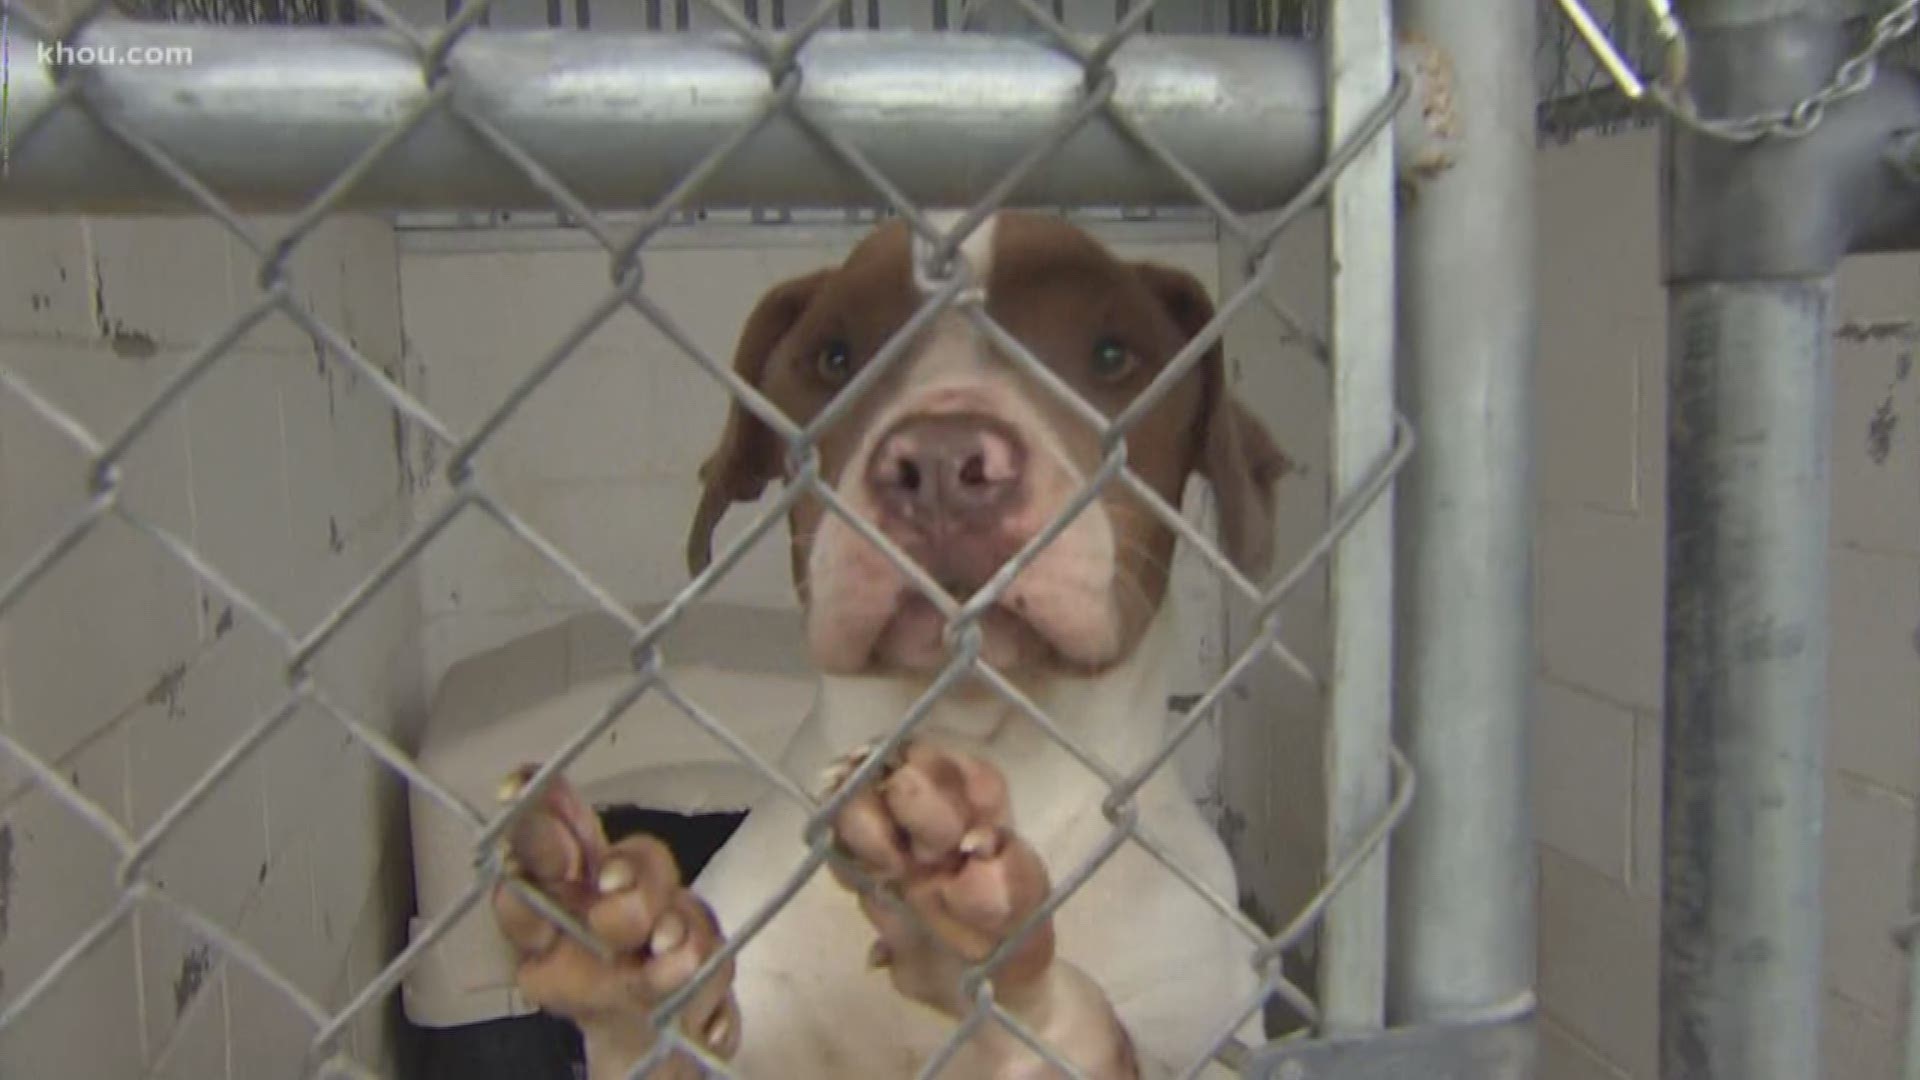 Fort Bend County Animal Services are asking for the public's help in fostering animals this weekend as a hard freeze is expected in southeast Texas.